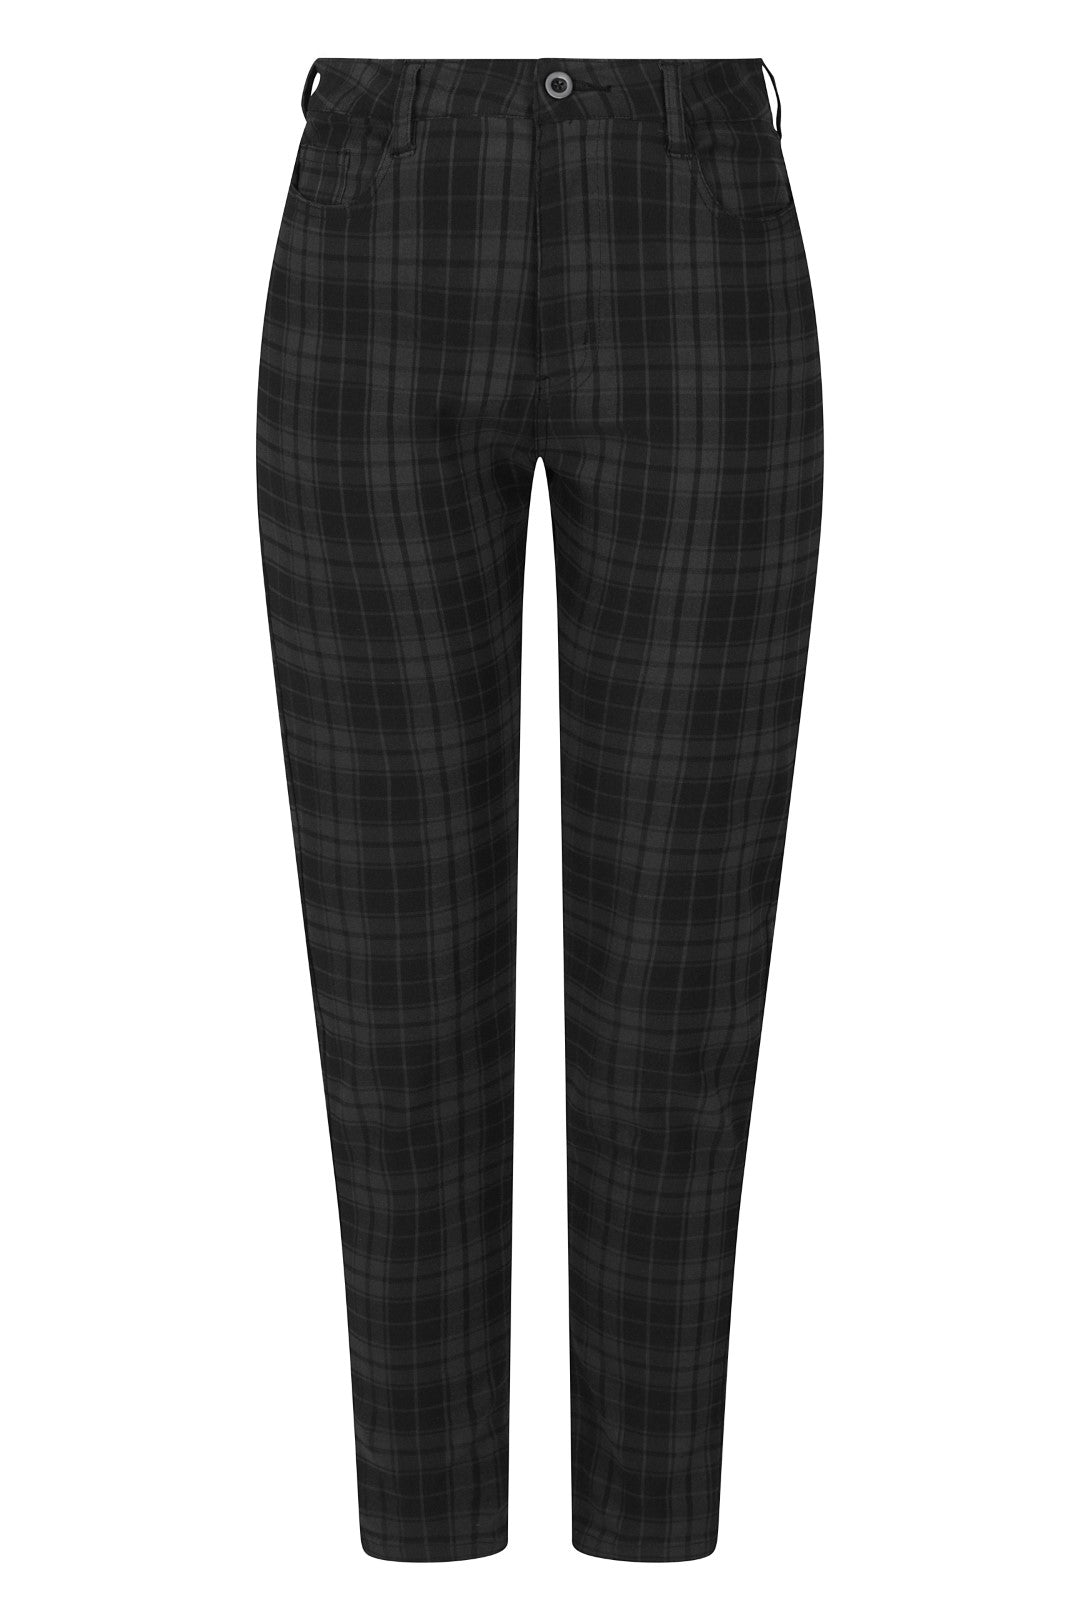 Storm Skinny Trousers